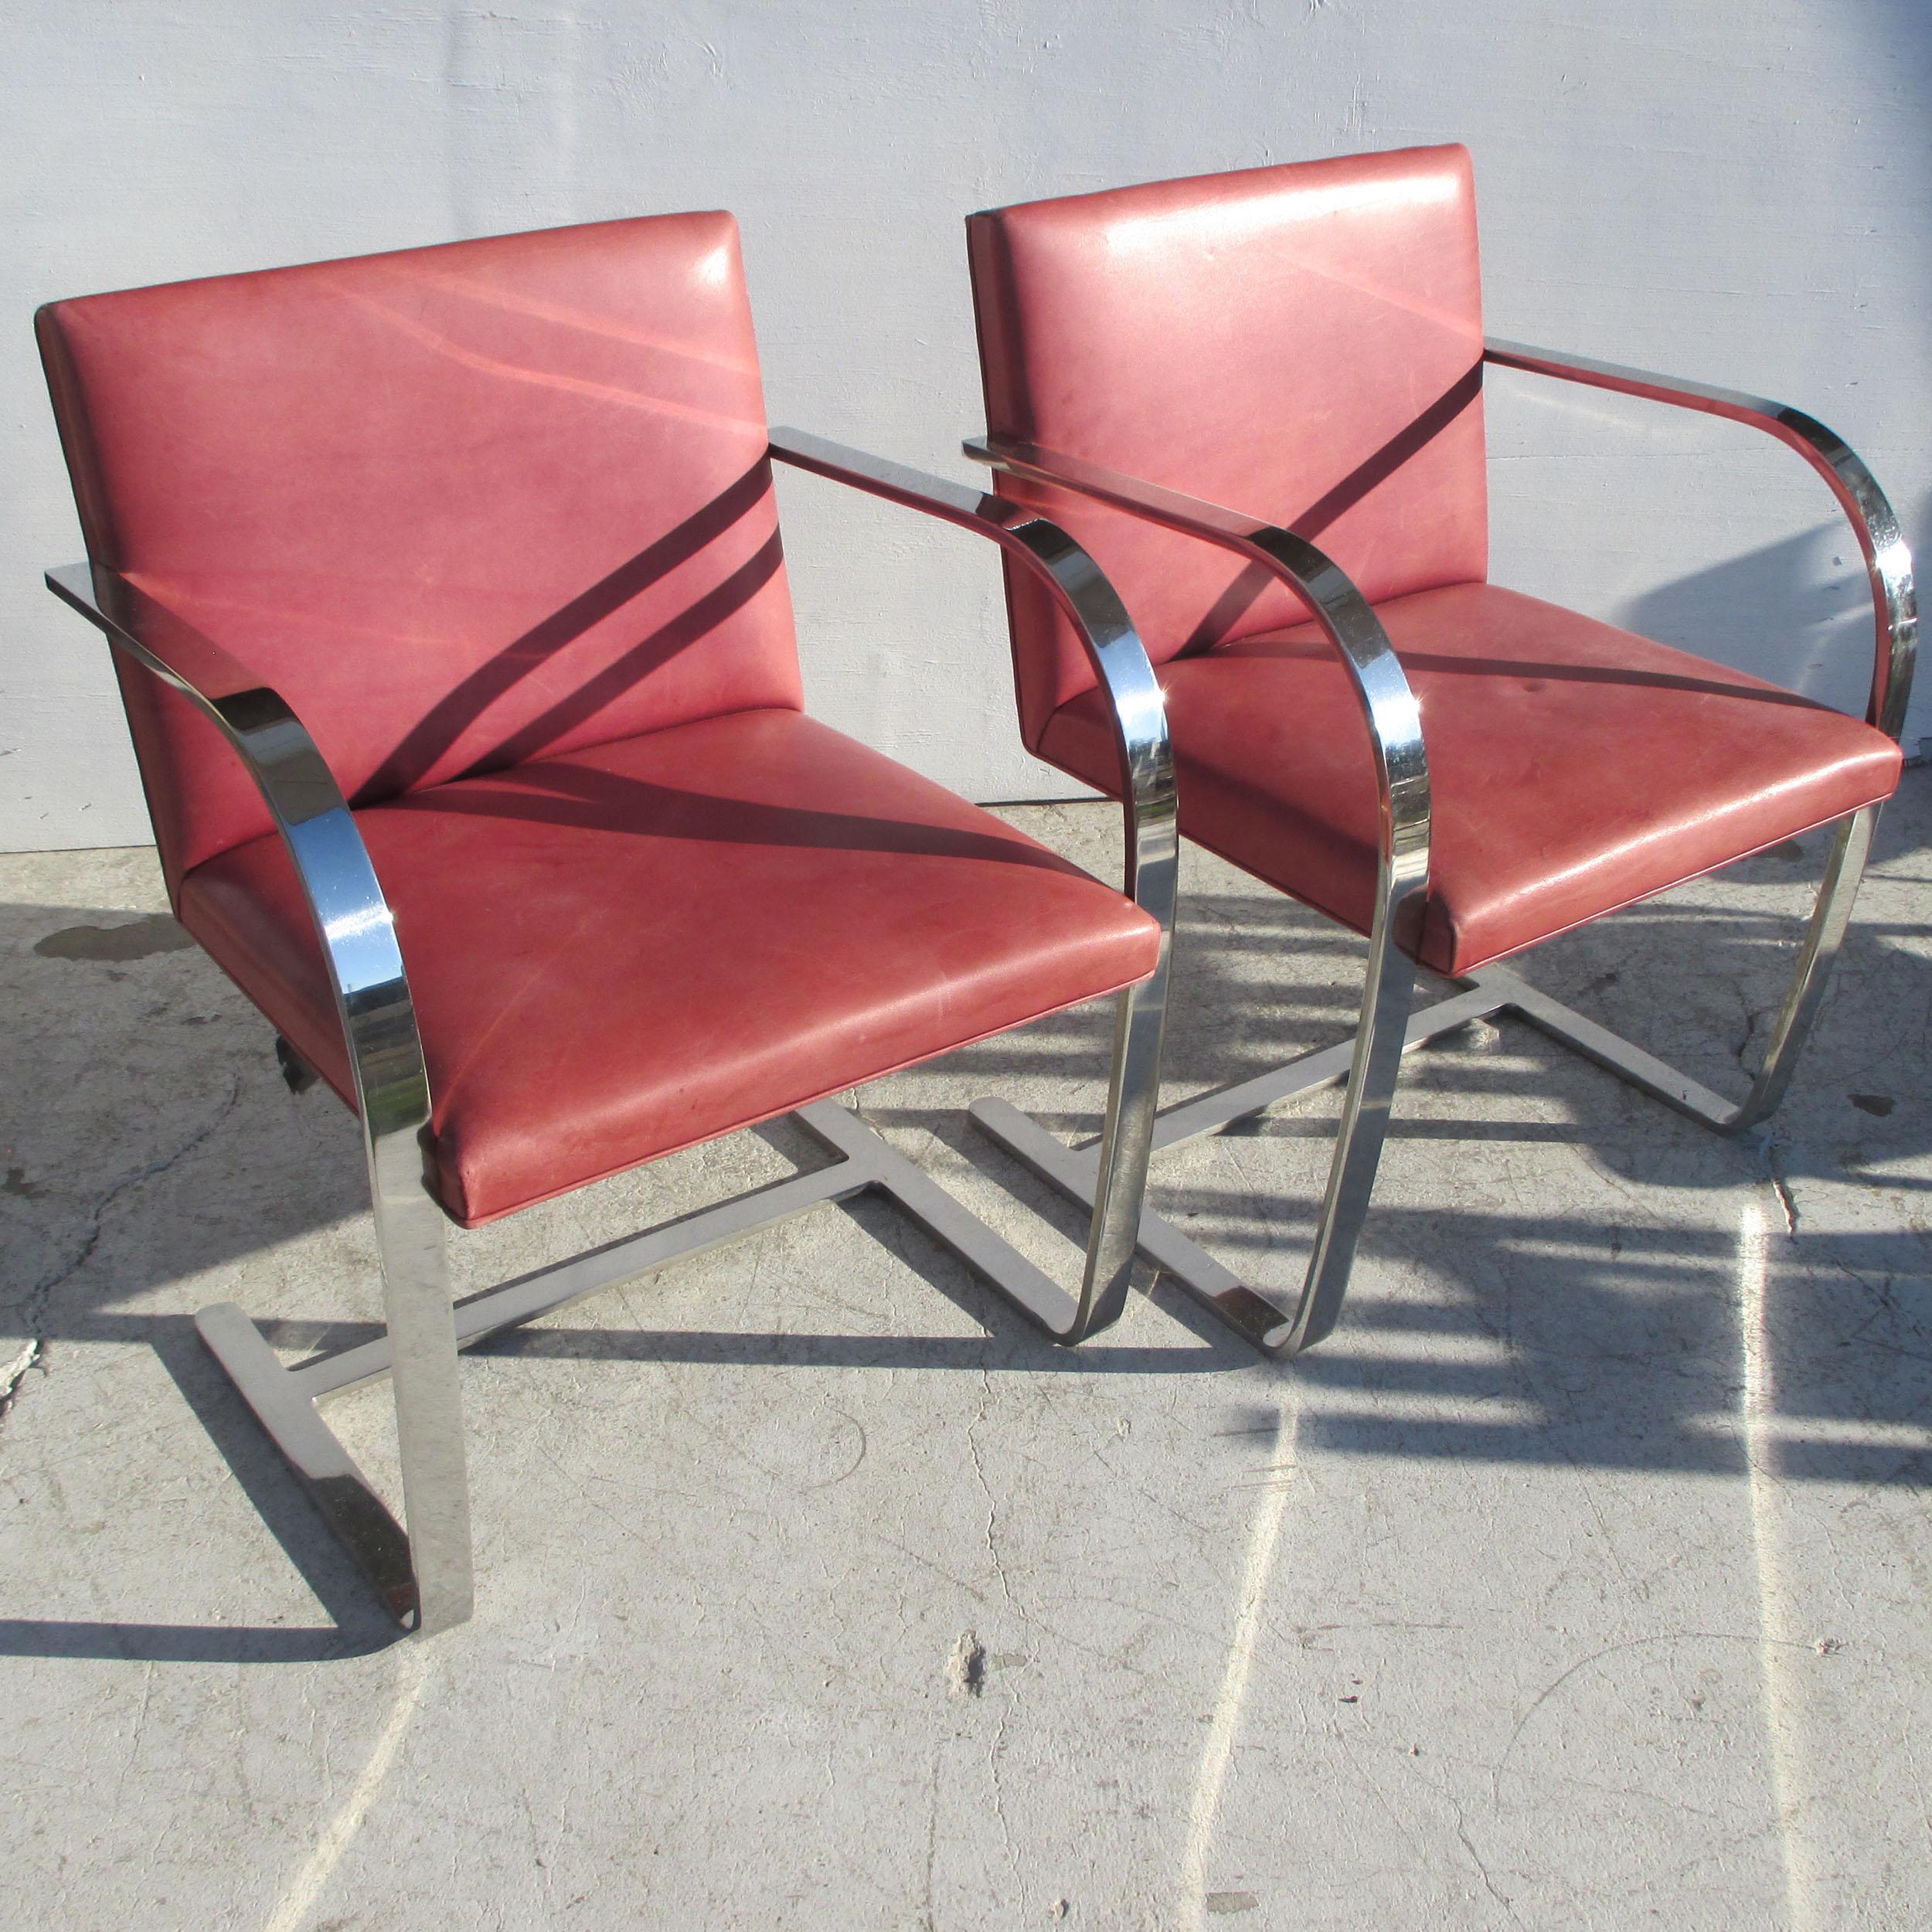 Midcentury Knoll Mies Van Der Rohe Brno Stainless Steel Flat Bar Chairs-Pair In Good Condition For Sale In Pasadena, TX